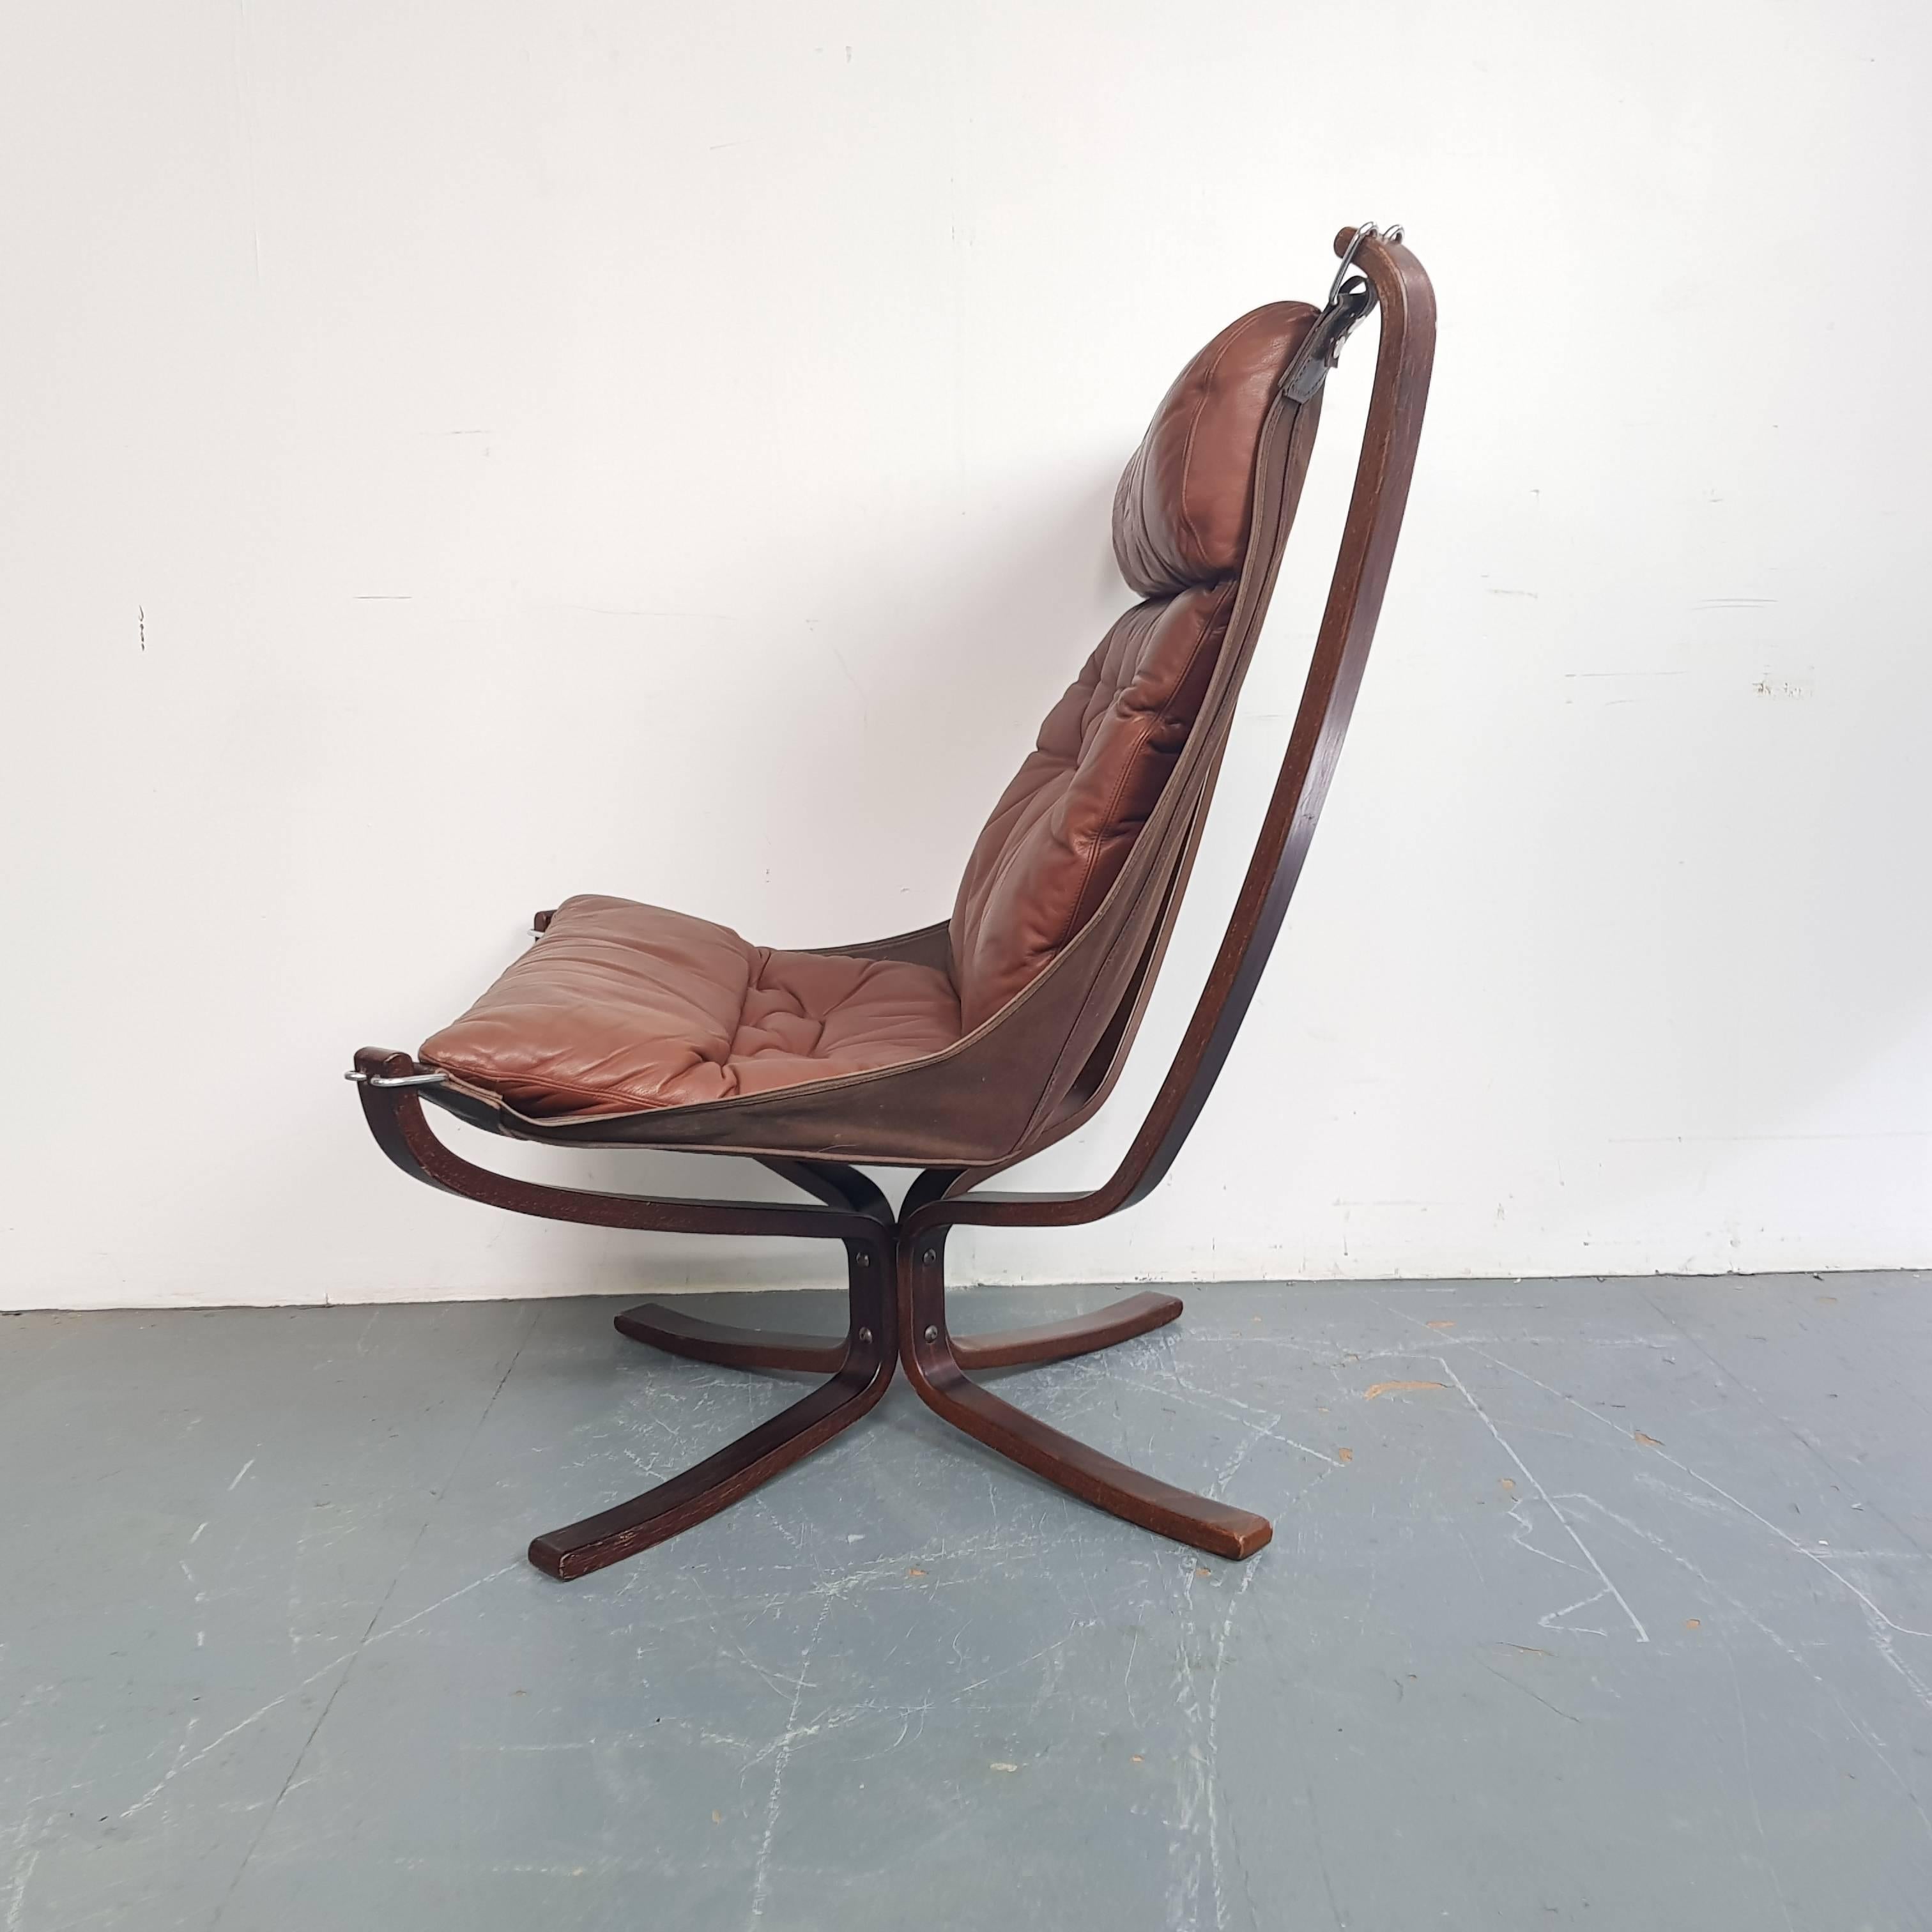 Vintage 1970s High Back Brown Leather Falcon Chair Designed by Sigurd Resell In Good Condition For Sale In Lewes, East Sussex